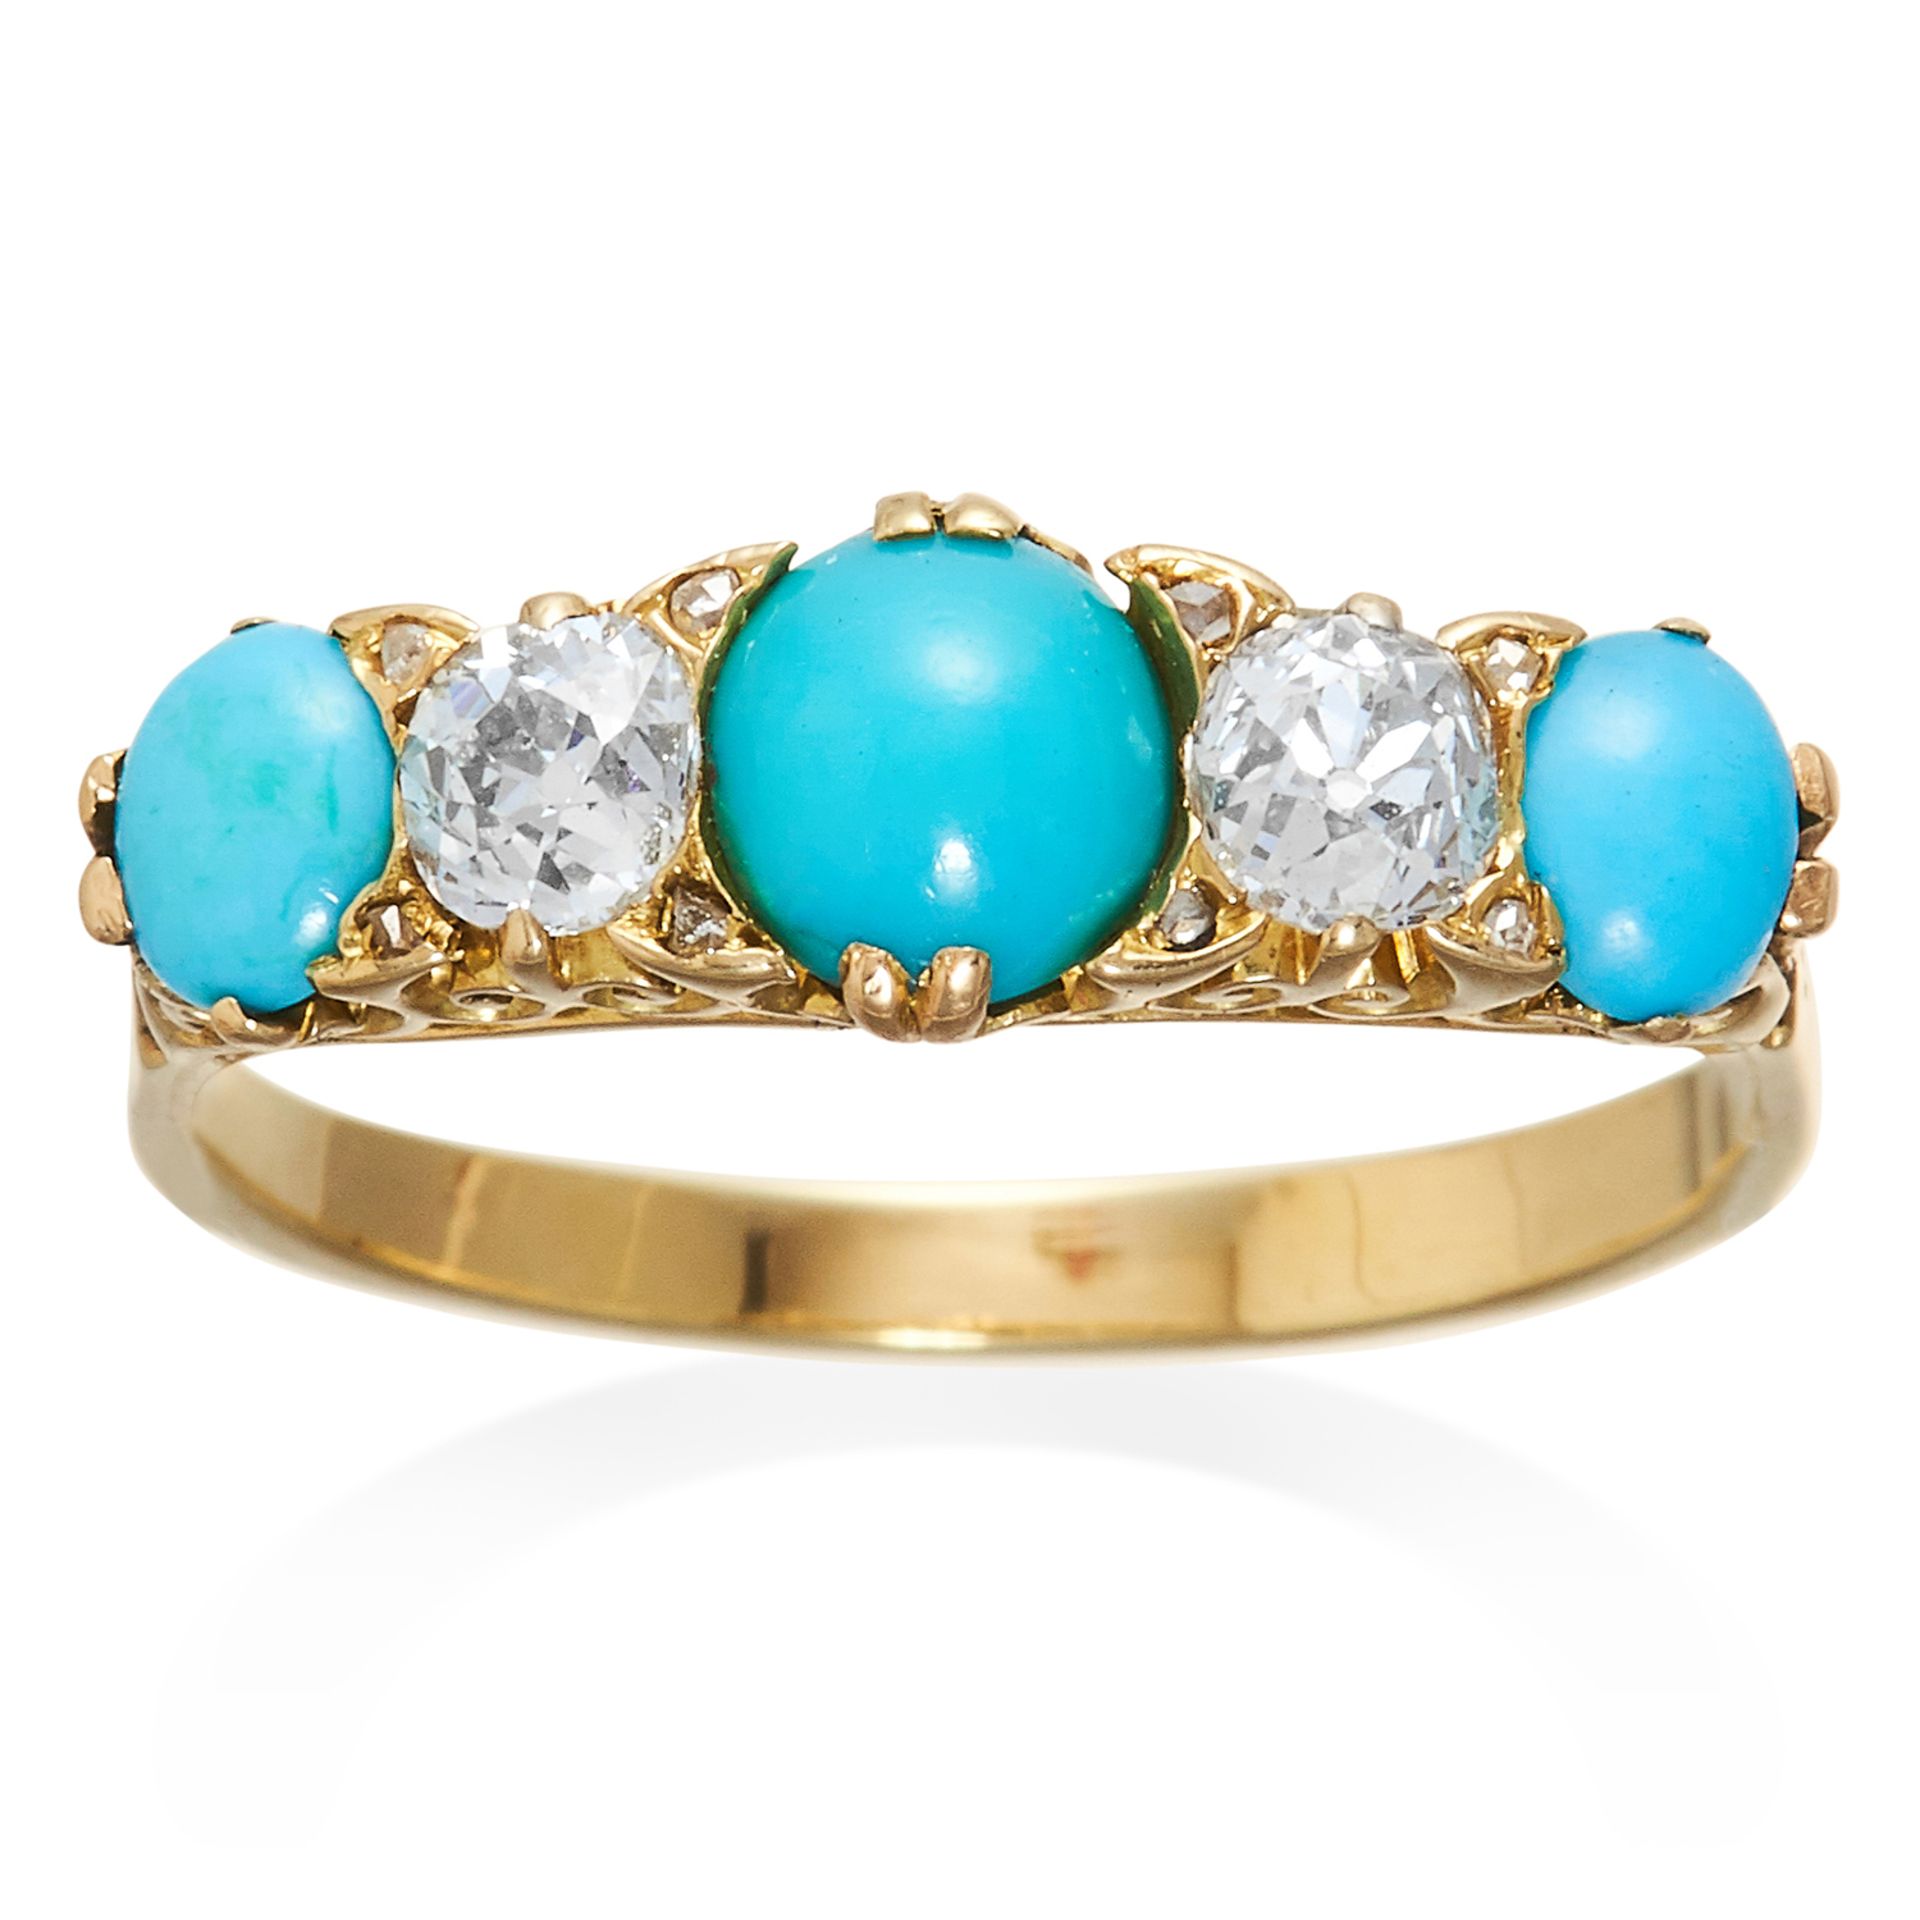 AN ANTIQUE TURQUOISE AND DIAMOND RING in high carat yellow gold, set with alternating turquoise